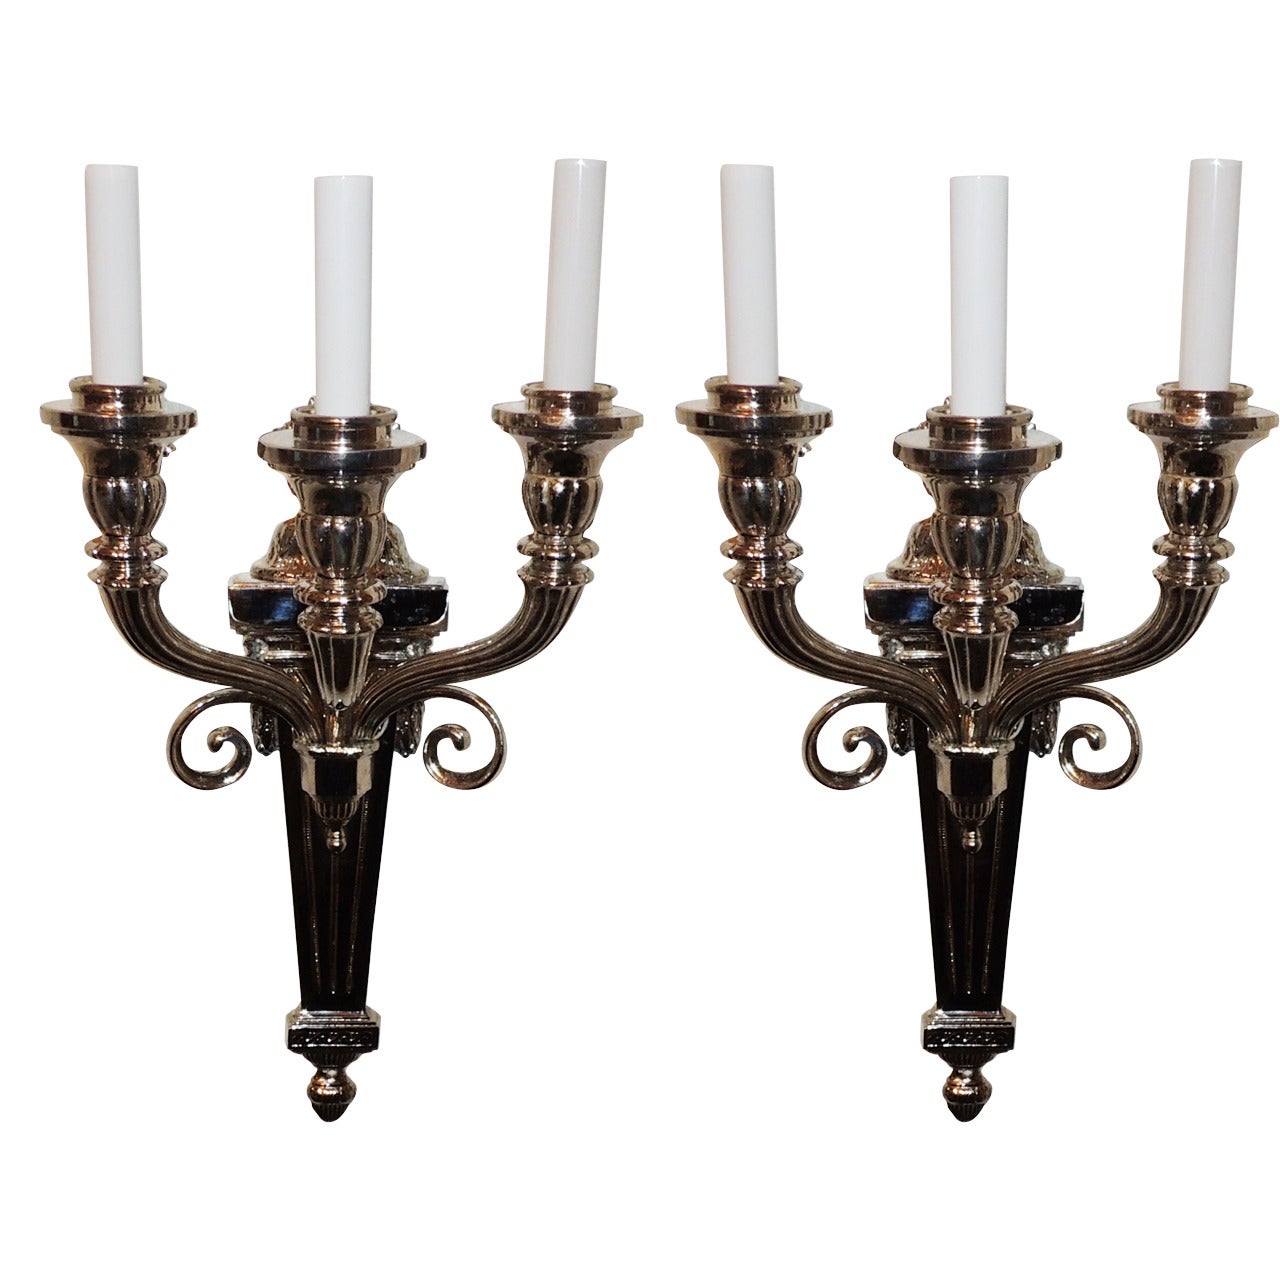 Neoclassical Nickel-Plated Three-Arm Sconces Attributed to Caldwell For Sale